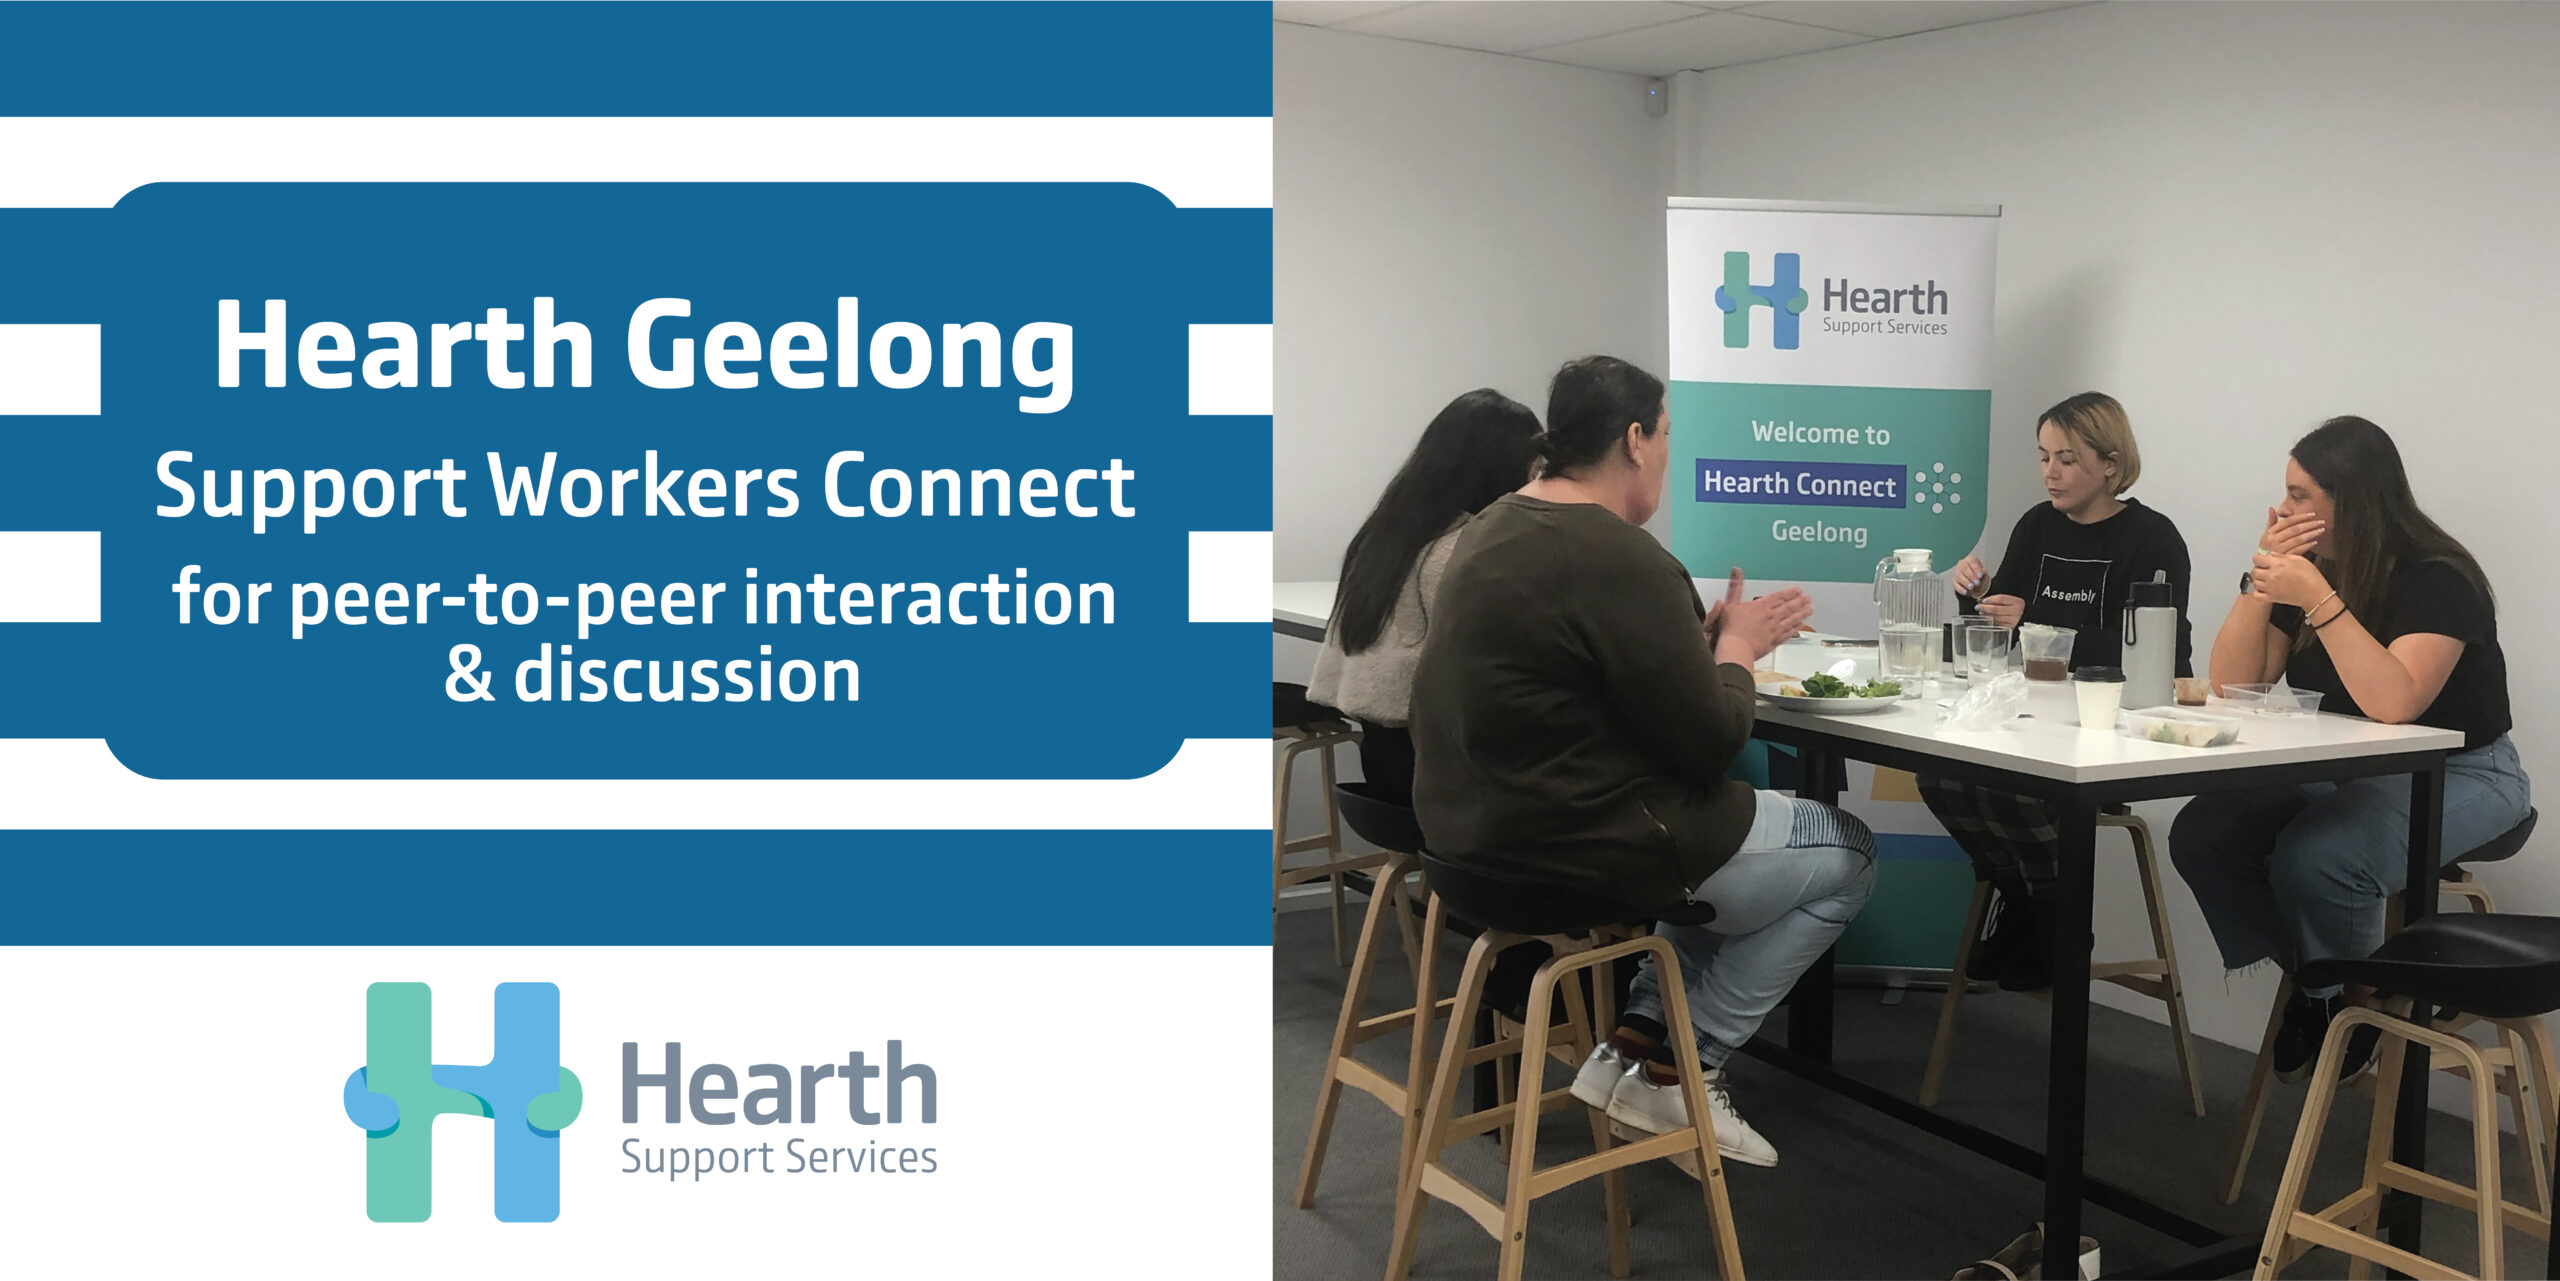 Hearth Support Services Geelong holds Support Worker Connect meeting